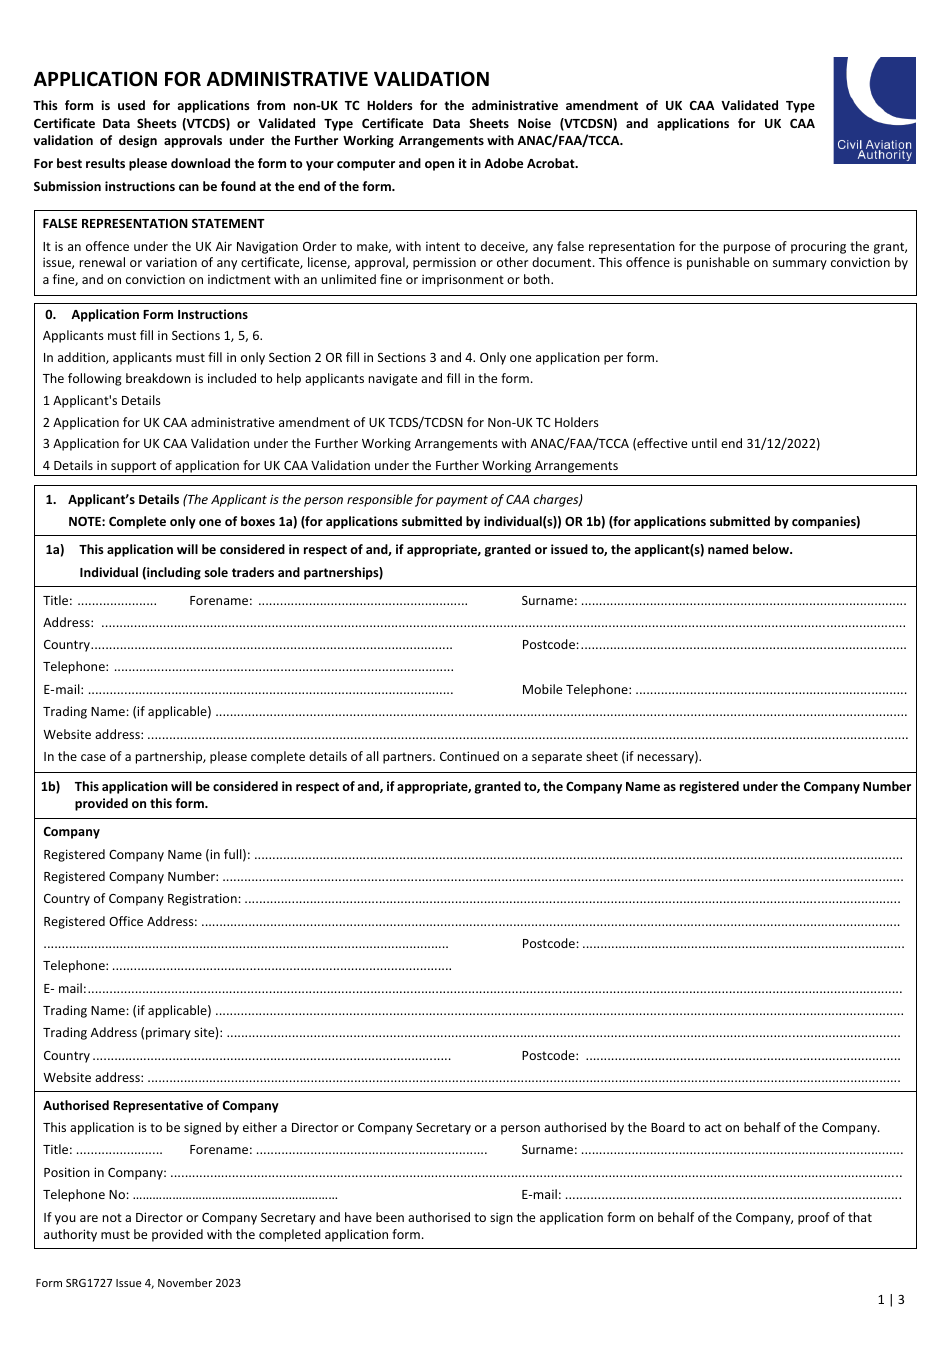 Form SRG1727 Application for Administrative Validation - United Kingdom, Page 1